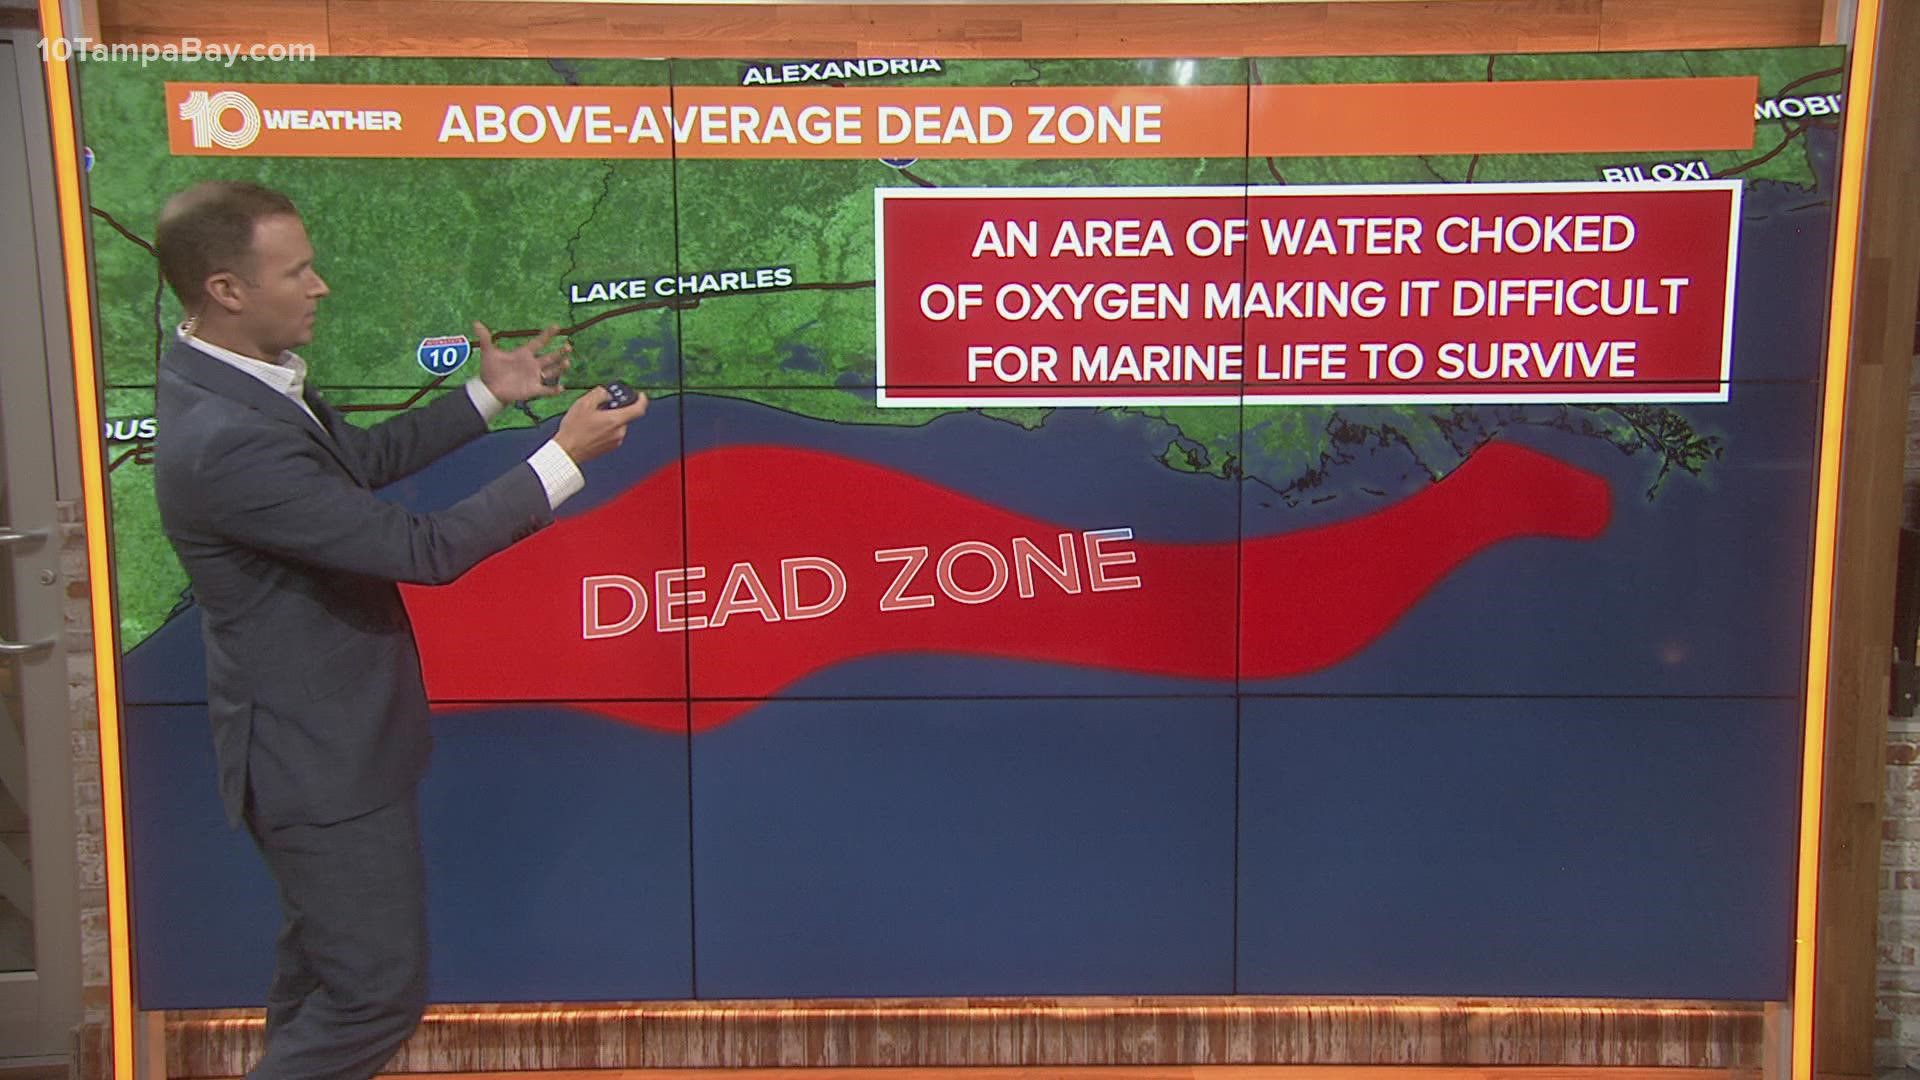 A "dead zone" is an area of low to no oxygen that can kill fish and other marine life.